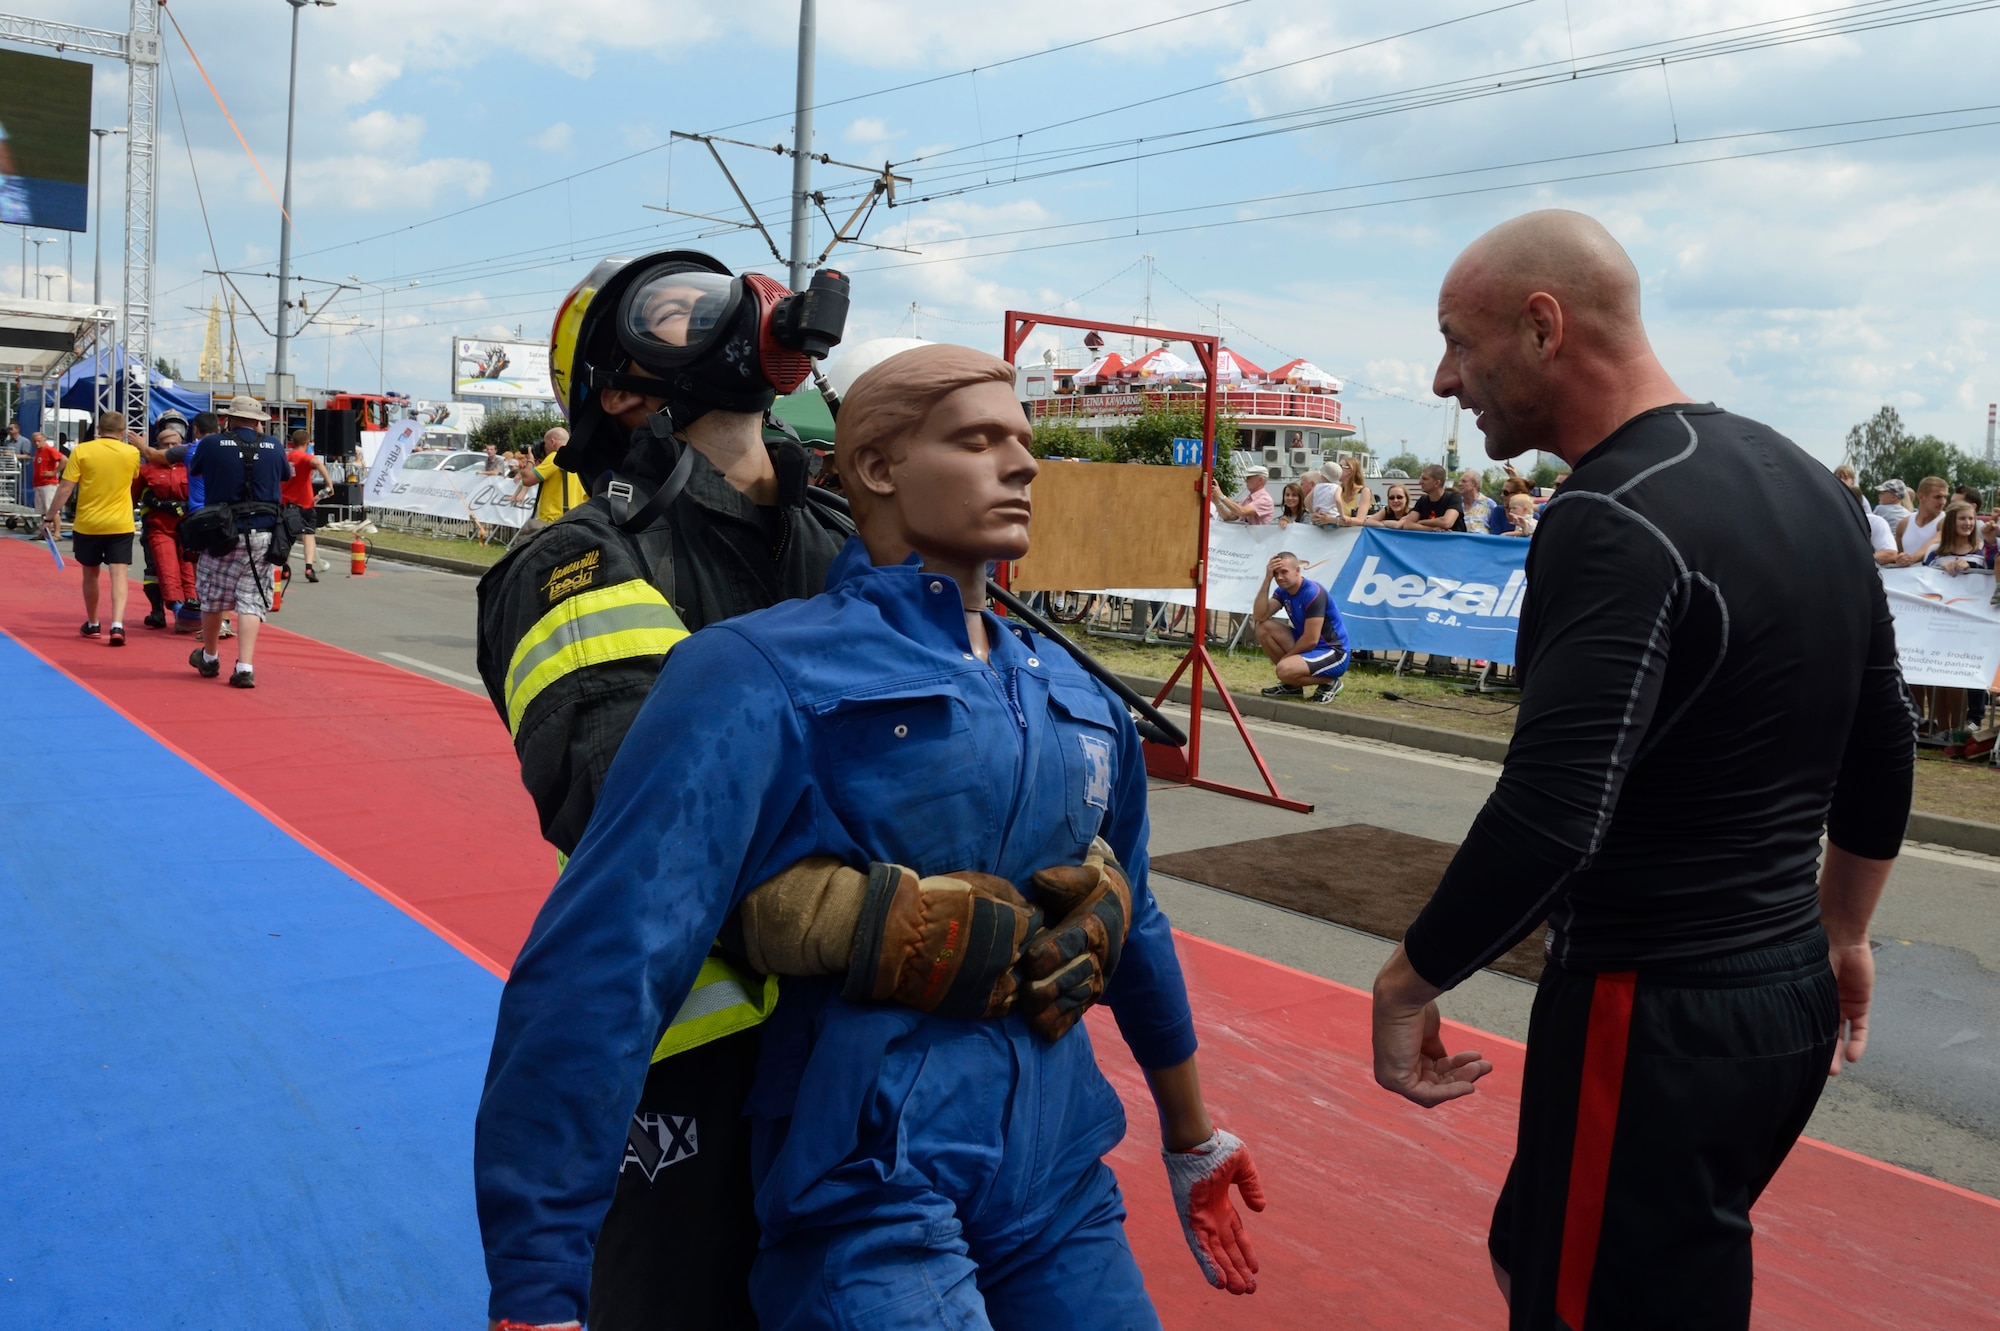 SPANGDAHLEM AIR BASE, Germany – Gerd Mueller, 52nd Civil Engineer Squadron firefighter crew chief from Gransdorf, Germany, encourages U.S. Air Force Staff Sgt. Benjamin Gonsales, 52nd Civil Engineer Squadron firefighter from Savannah, Ga., during the victim rescue obstacle while participating in the Szczecin Firefighter Combat Challenge in Szczecin, Poland Aug. 10, 2013. The Spangdahlem team ranked 11th out of 36 teams comprising of more than 4 countries. (U.S. Air Force photo by Staff Sgt. Christopher Ruano/Released)